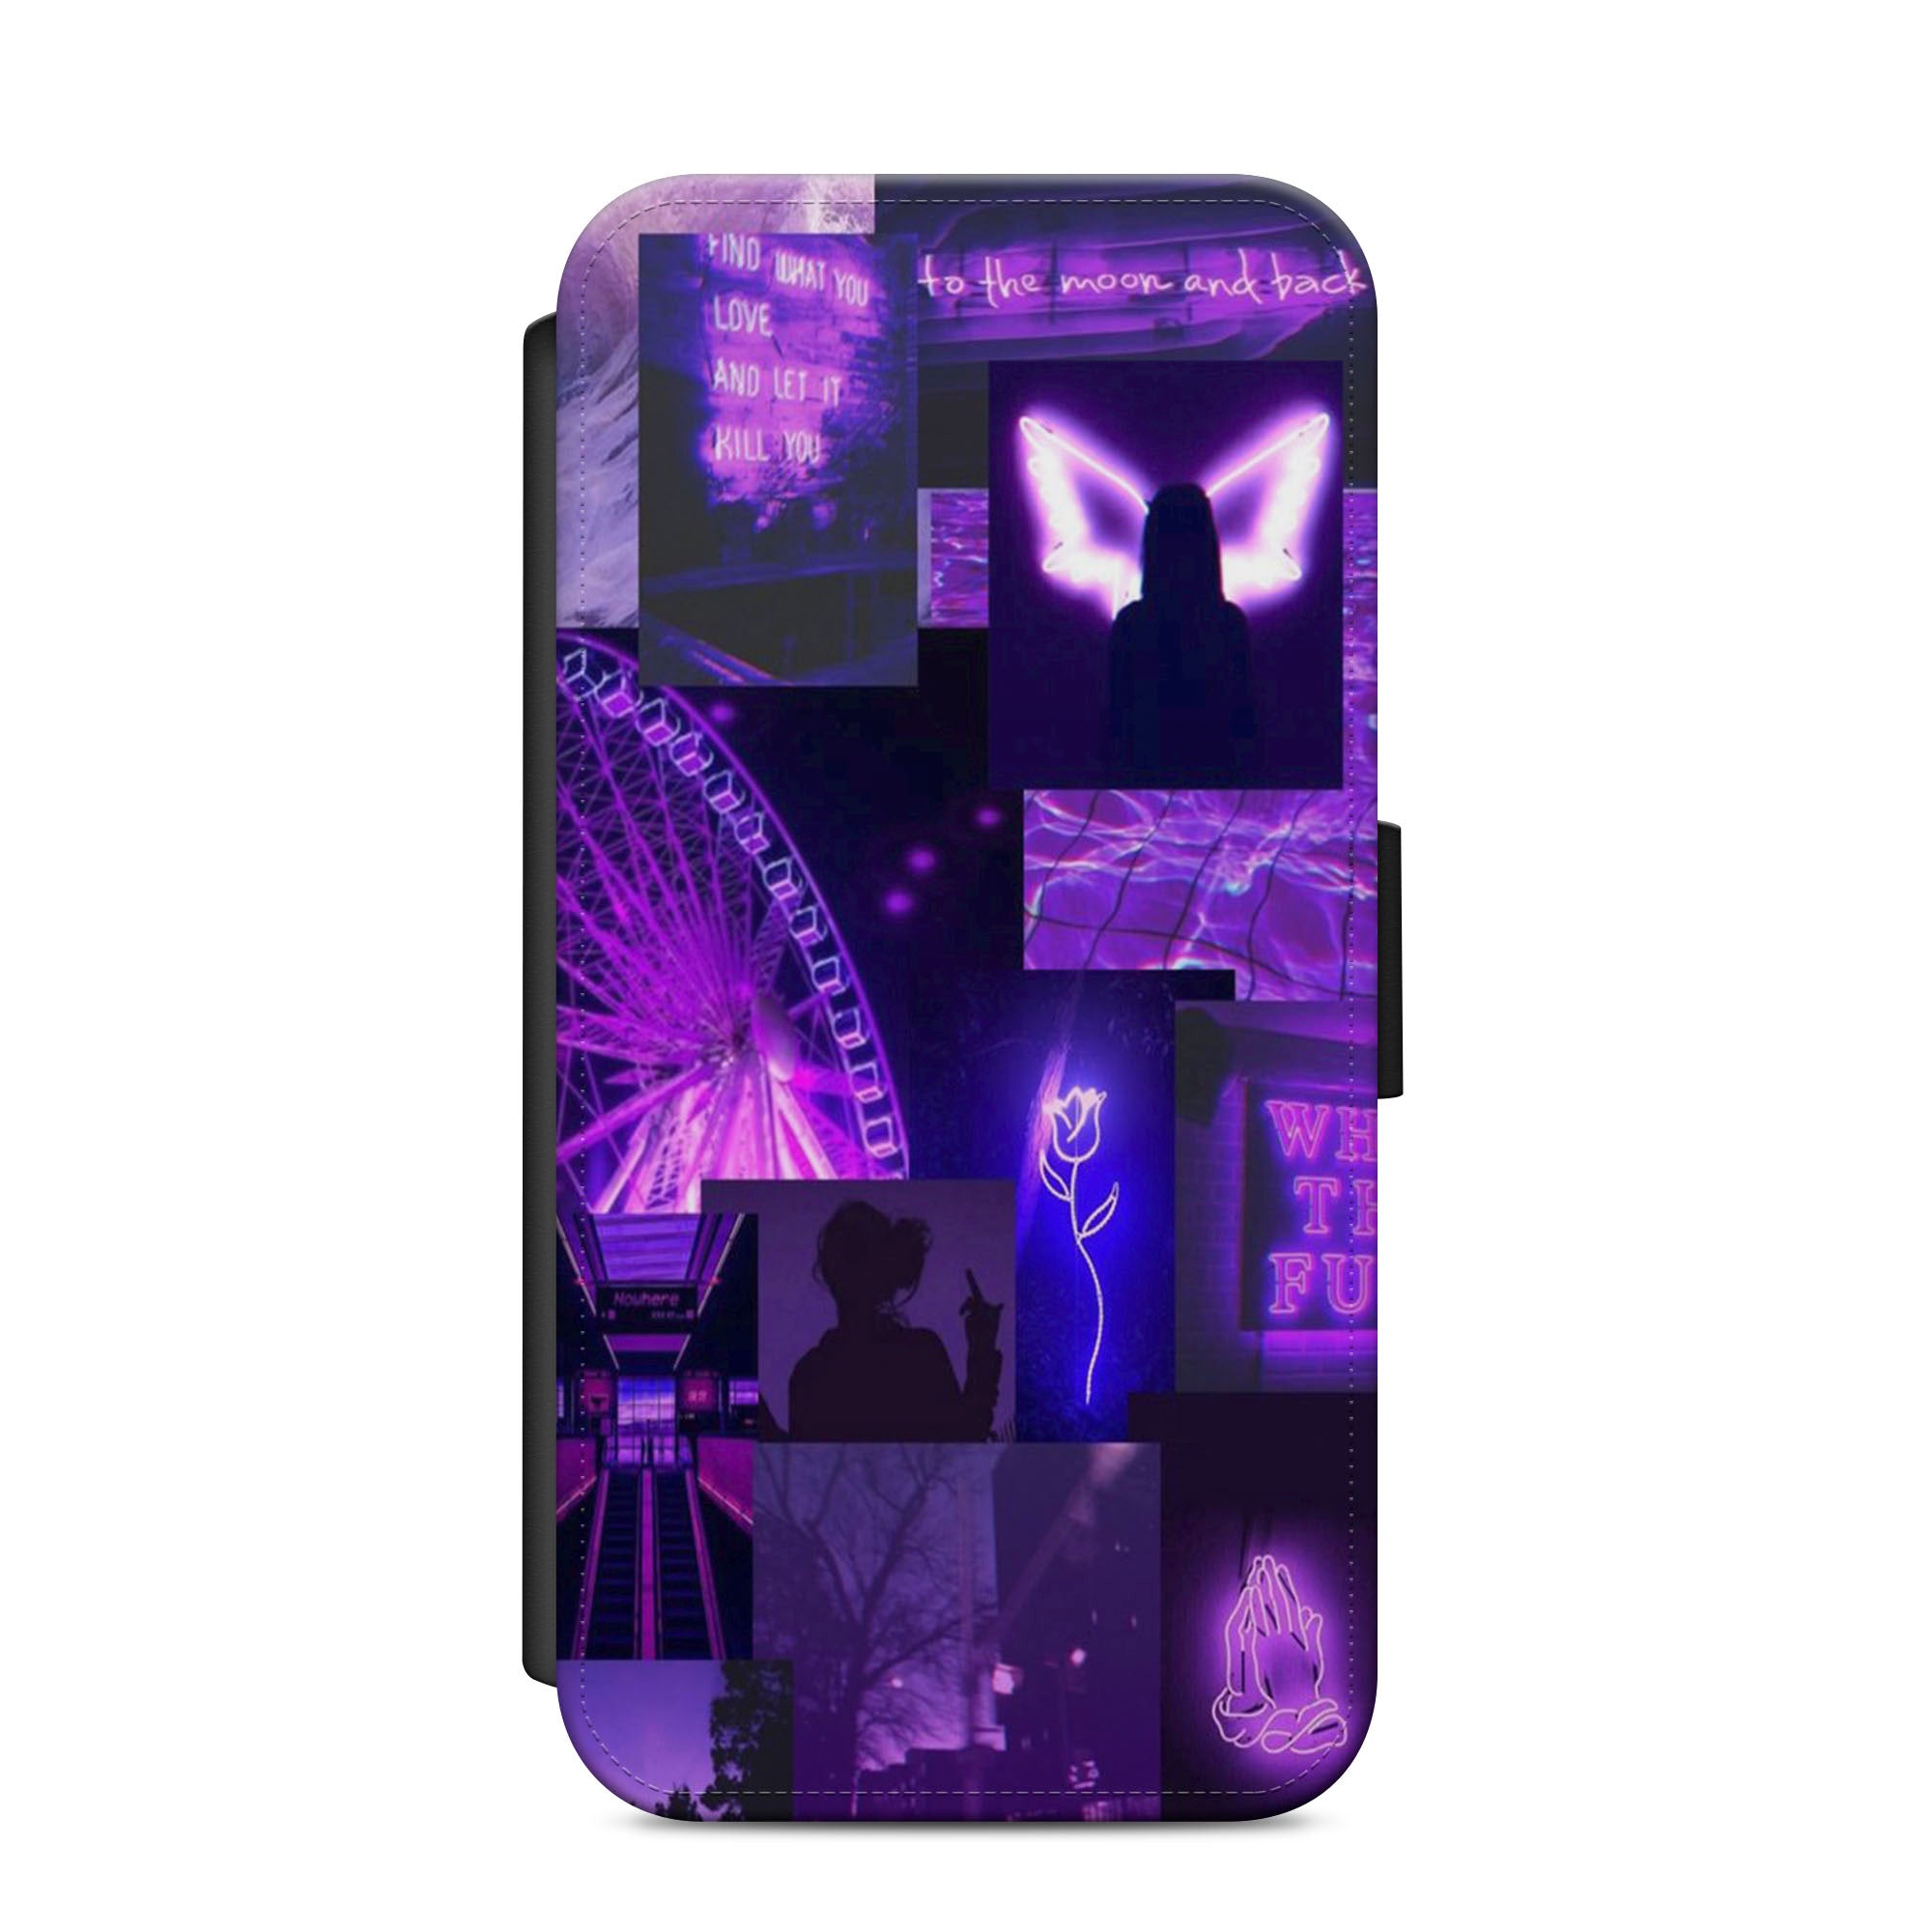 Aesthetic Purple Collage Faux Leather Flip Case Wallet for iPhone / Samsung